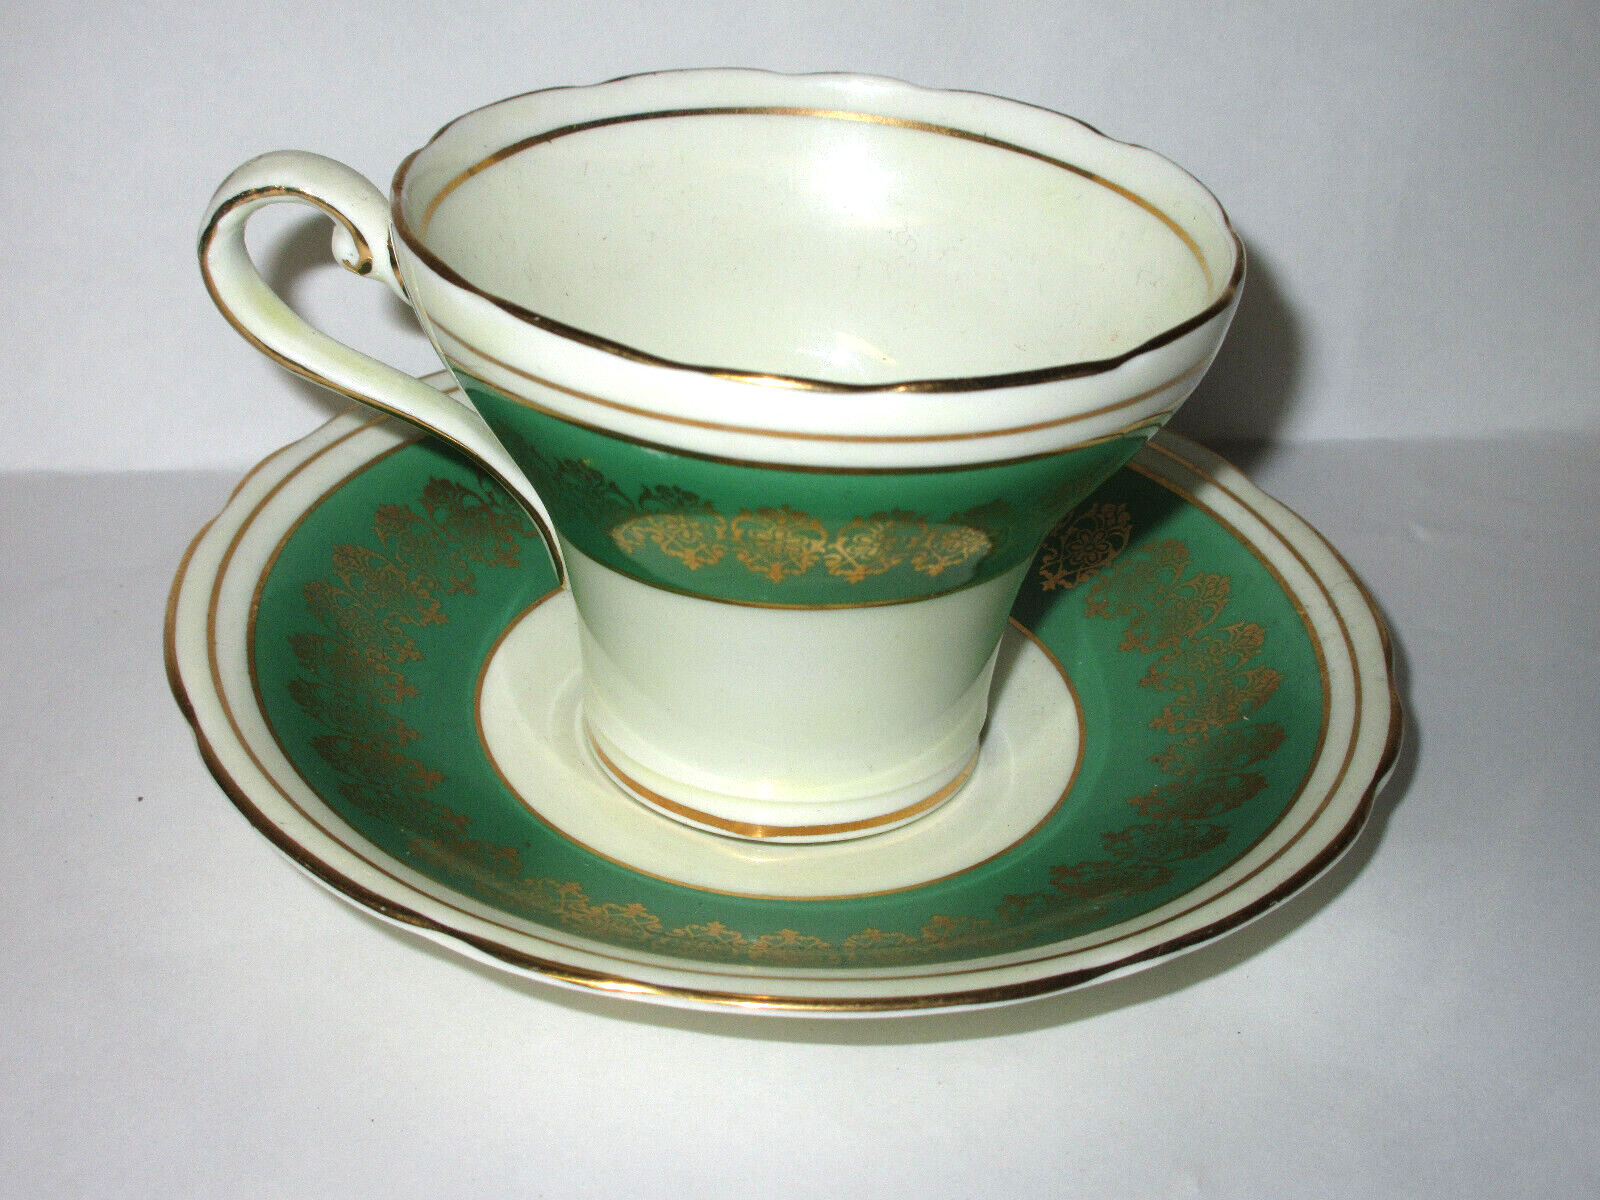 Aynsley Bone China Green and white  Teacup & Saucer England  (GR)